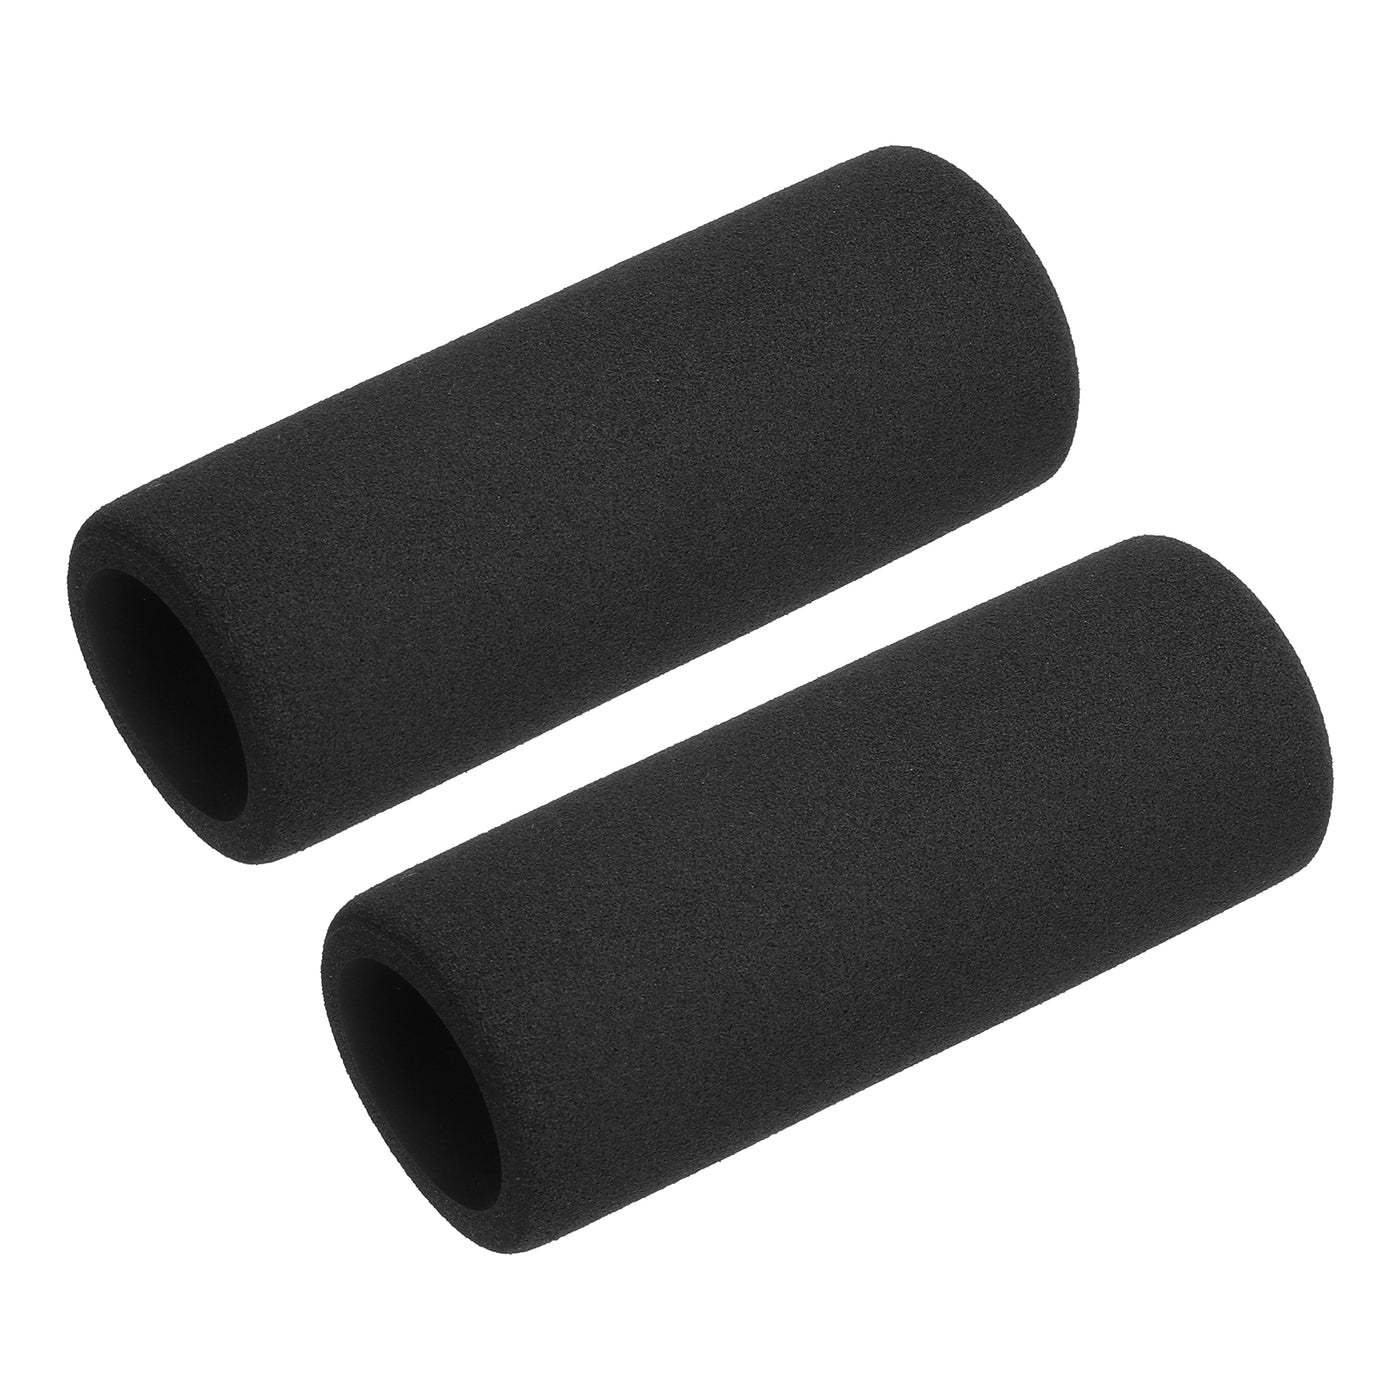 uxcell Uxcell Pipe Insulation Tube Foam Tubing for Handle Grip Support 32mm ID 44mm OD 108mm Heat Preservation Black 2pcs